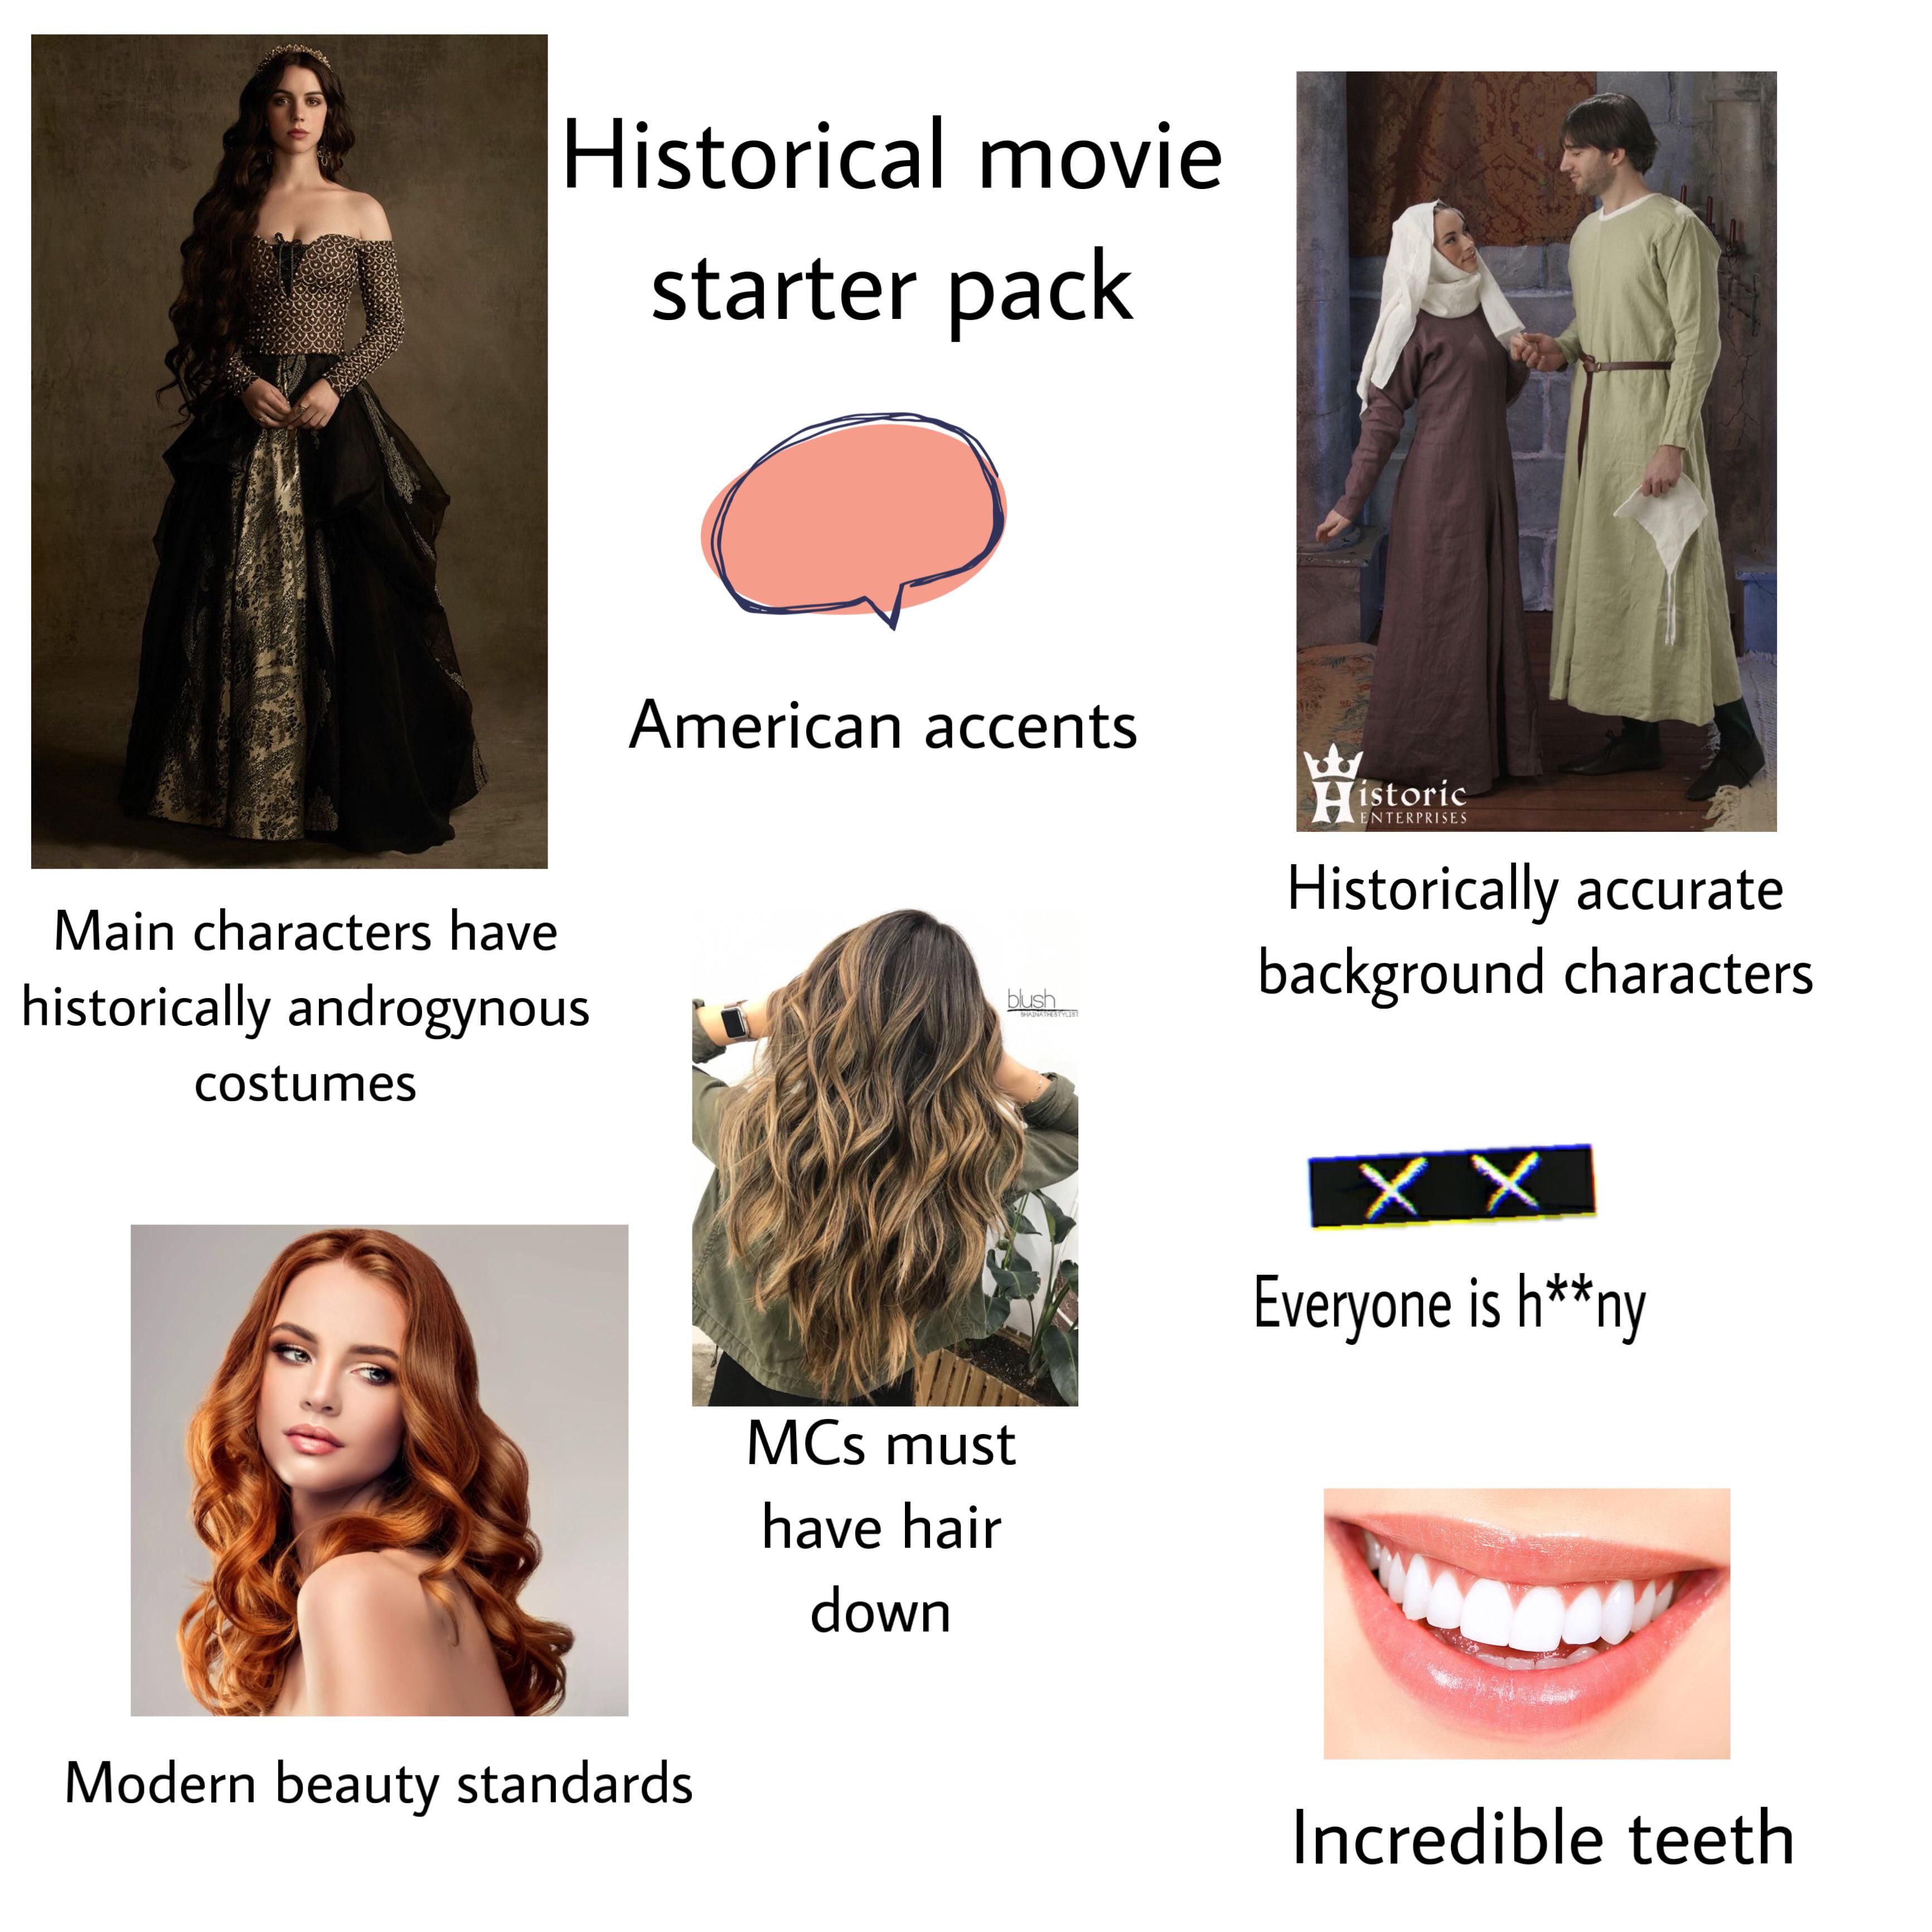 Historical movies starter pack